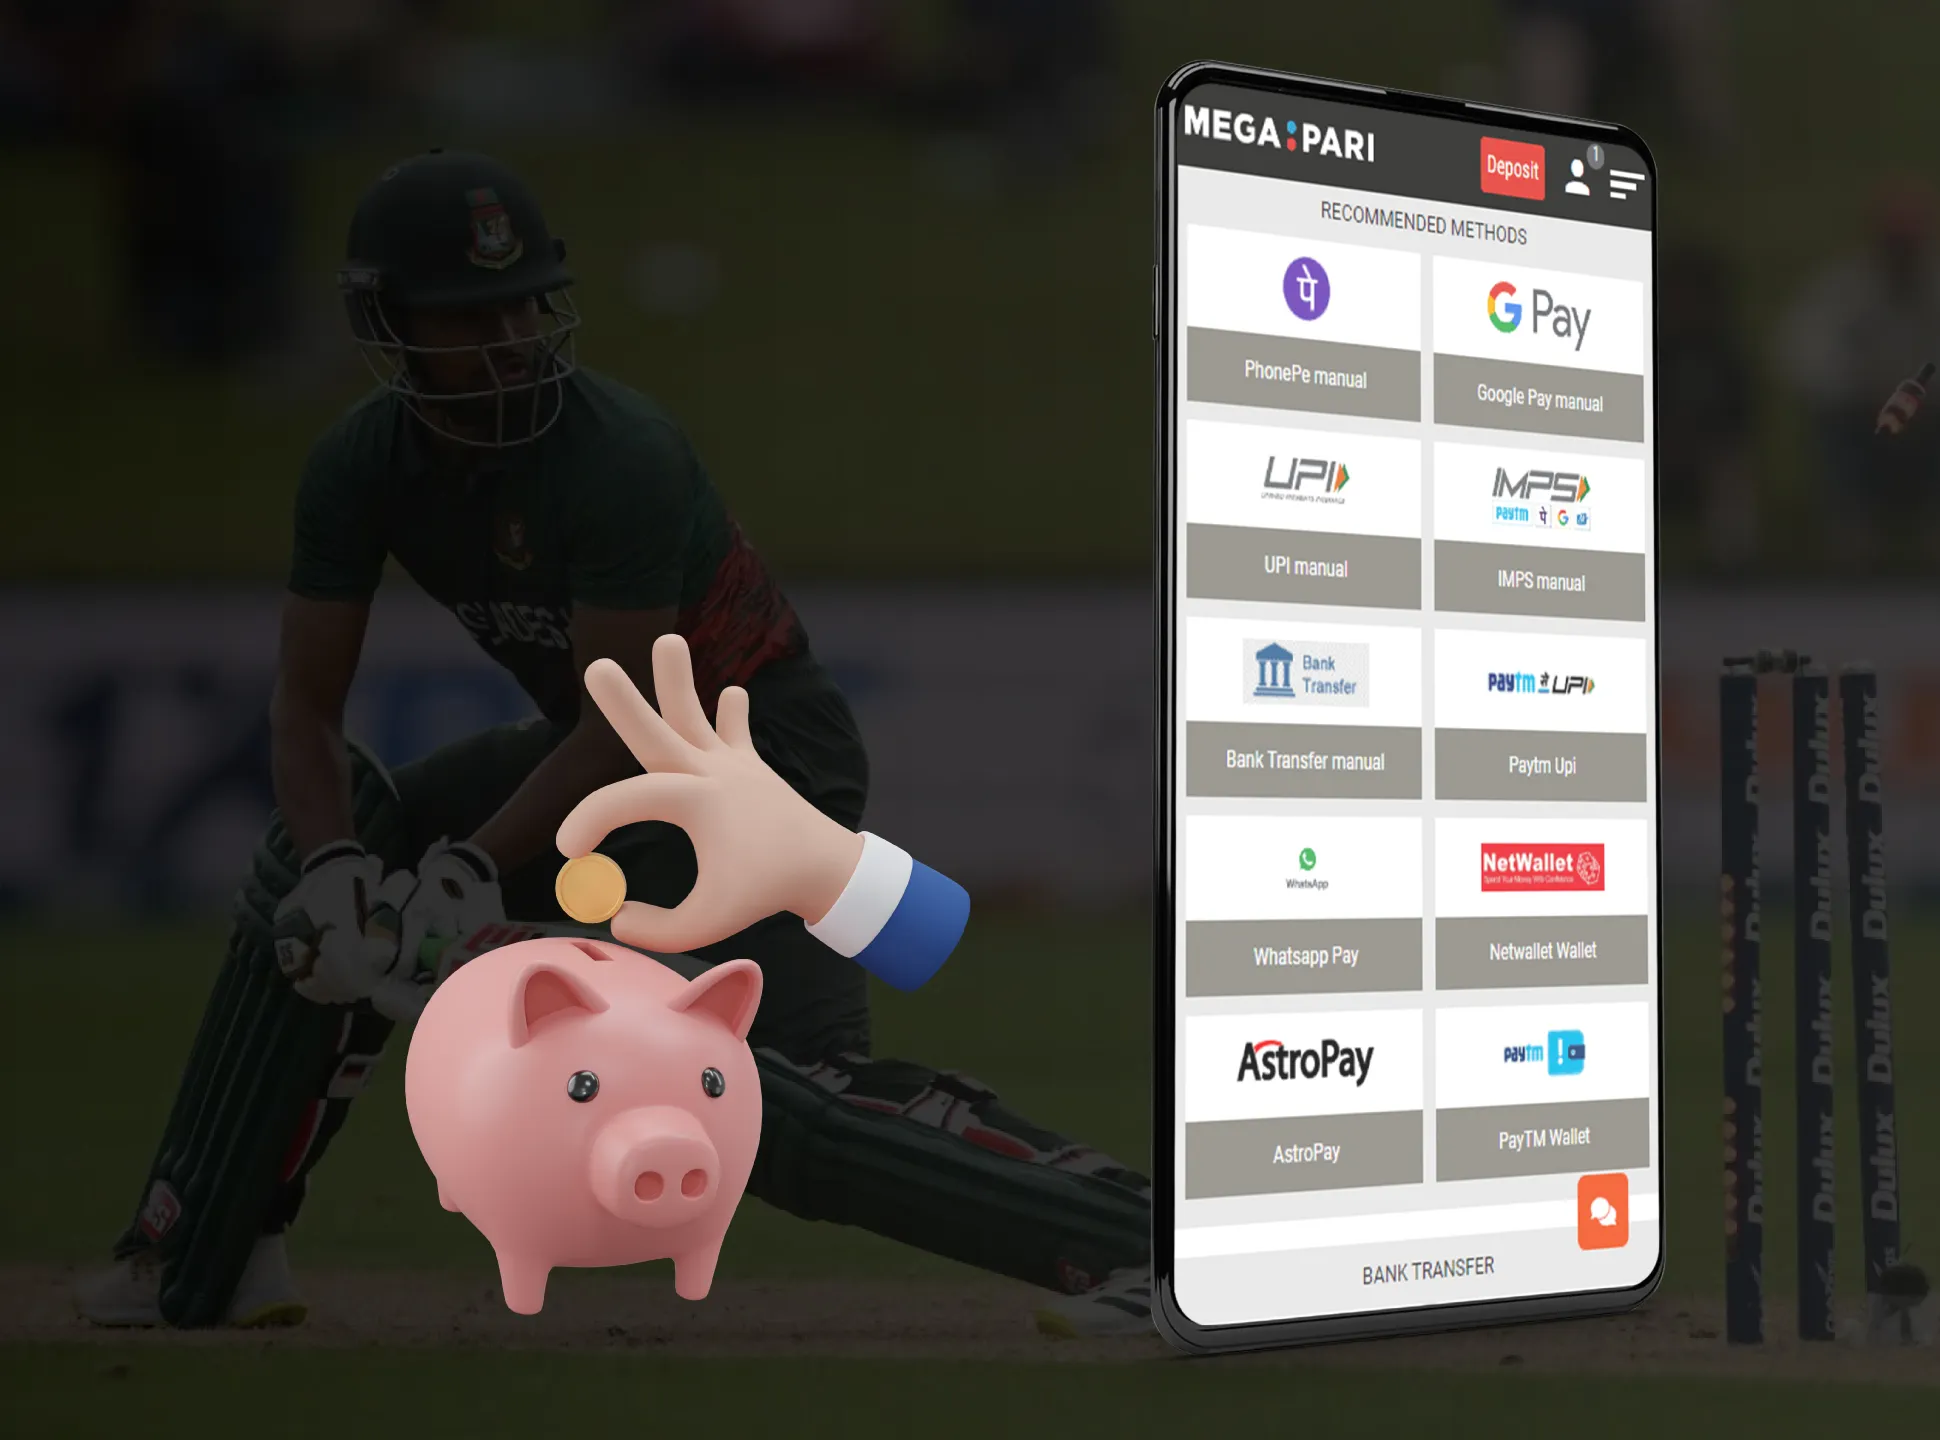 Make a deposit into your account to start betting on cricket.